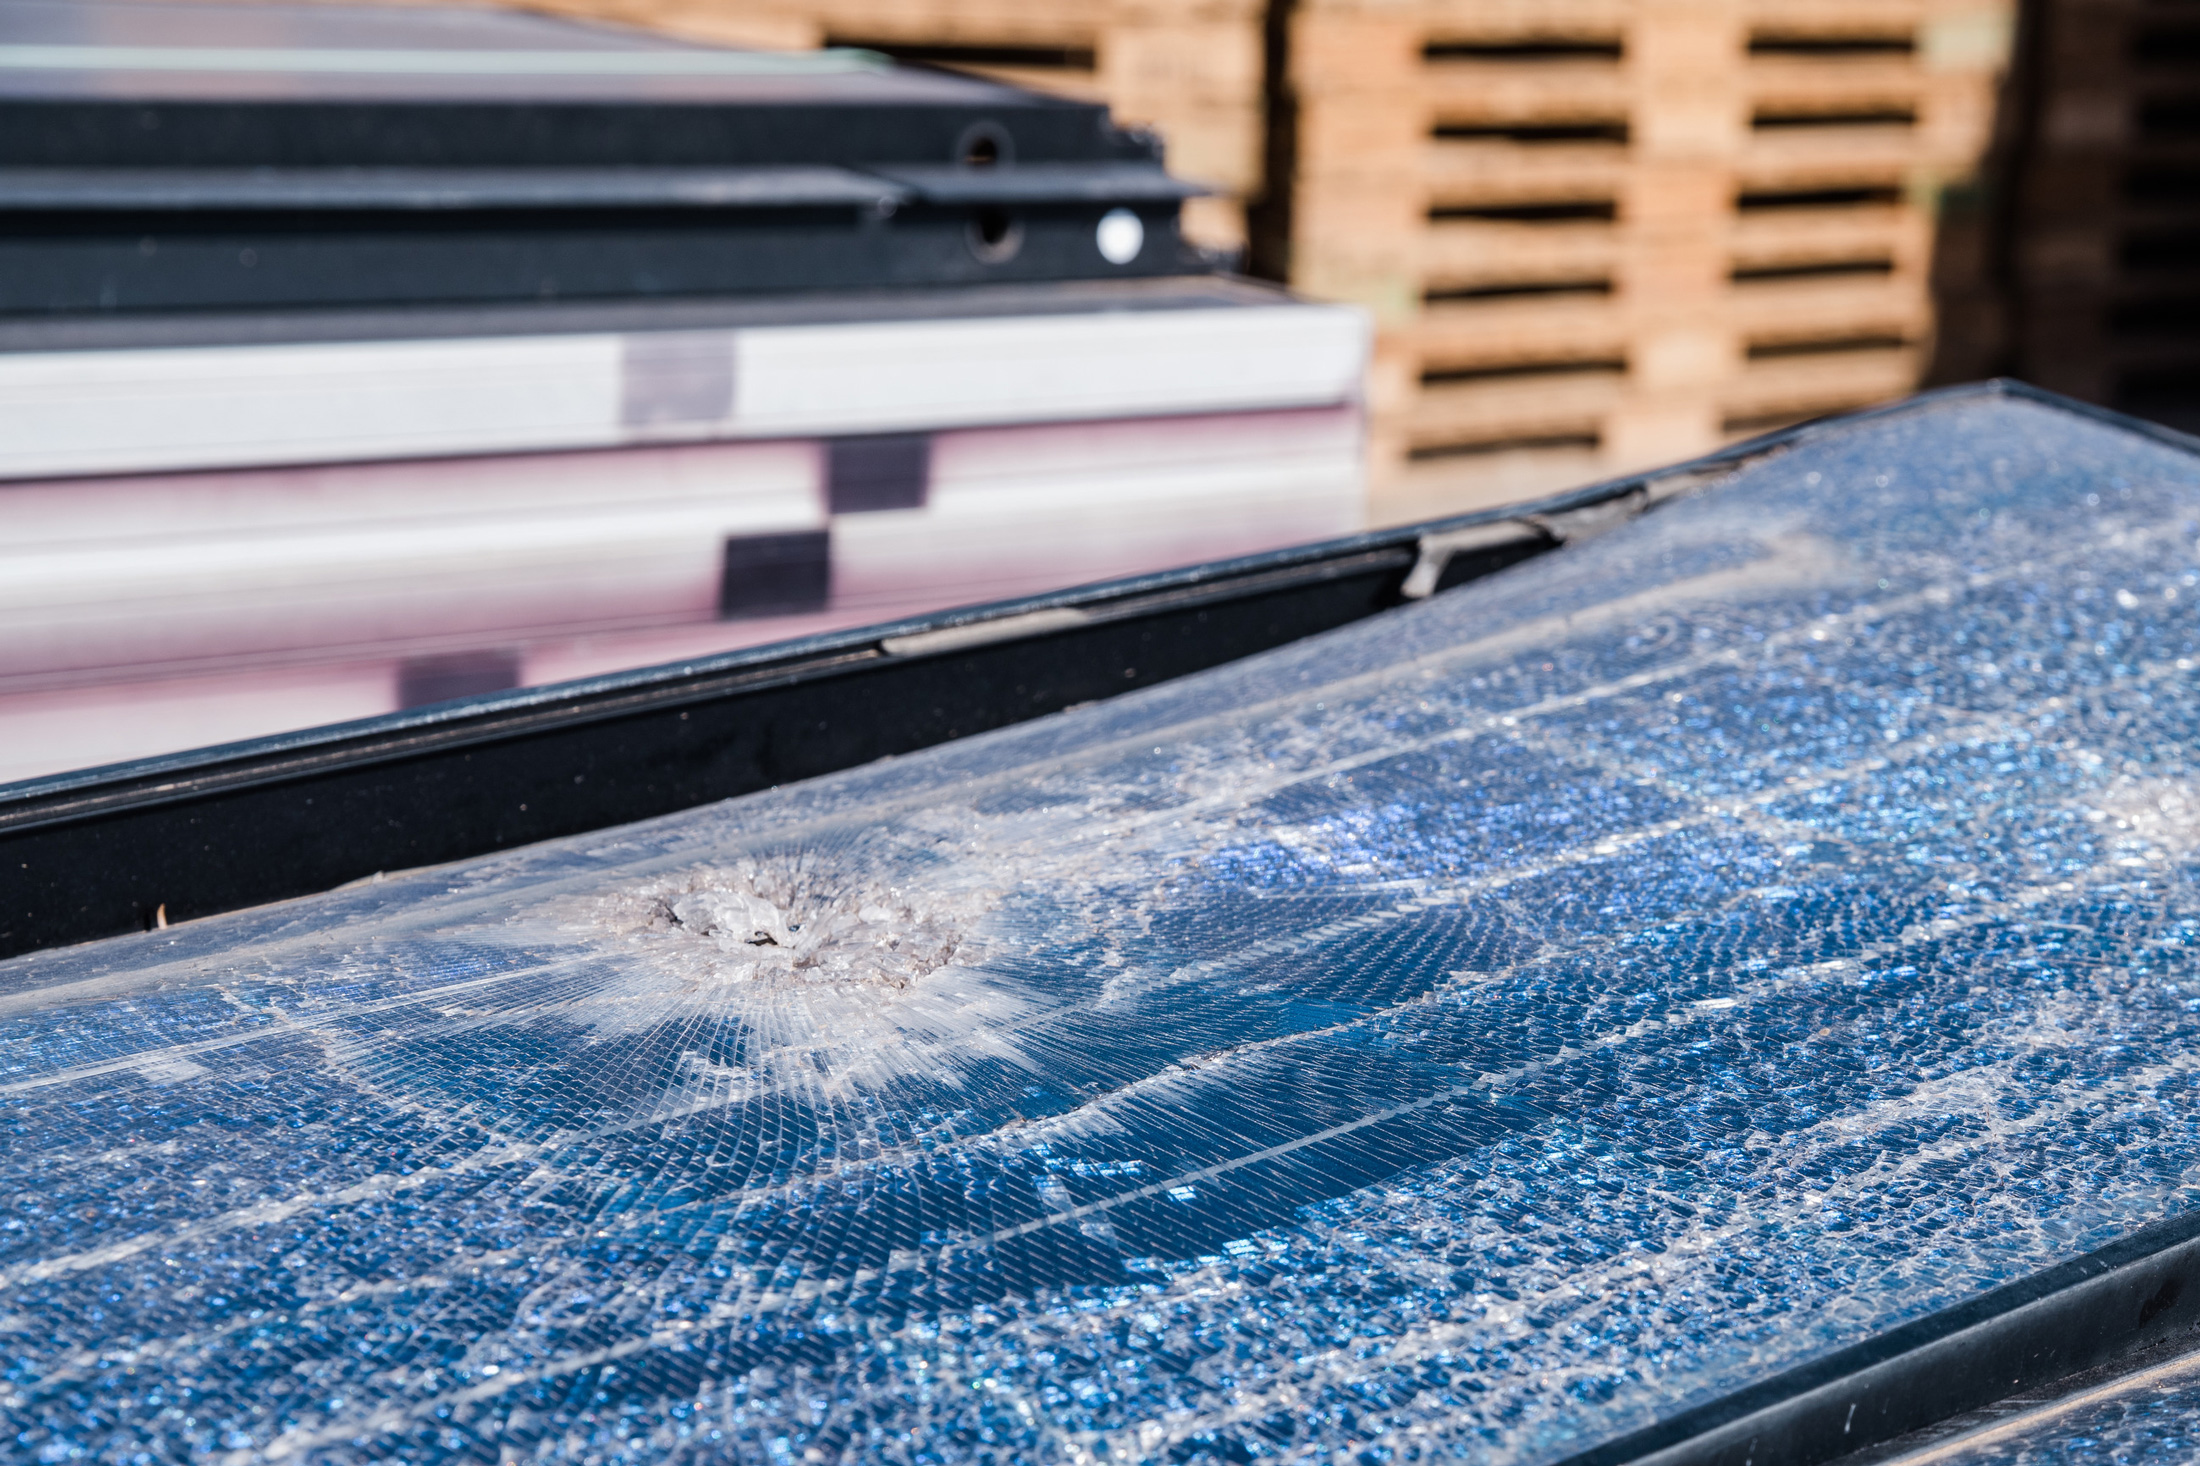 Solar panels are a pain to recycle. These companies are trying to fix that.